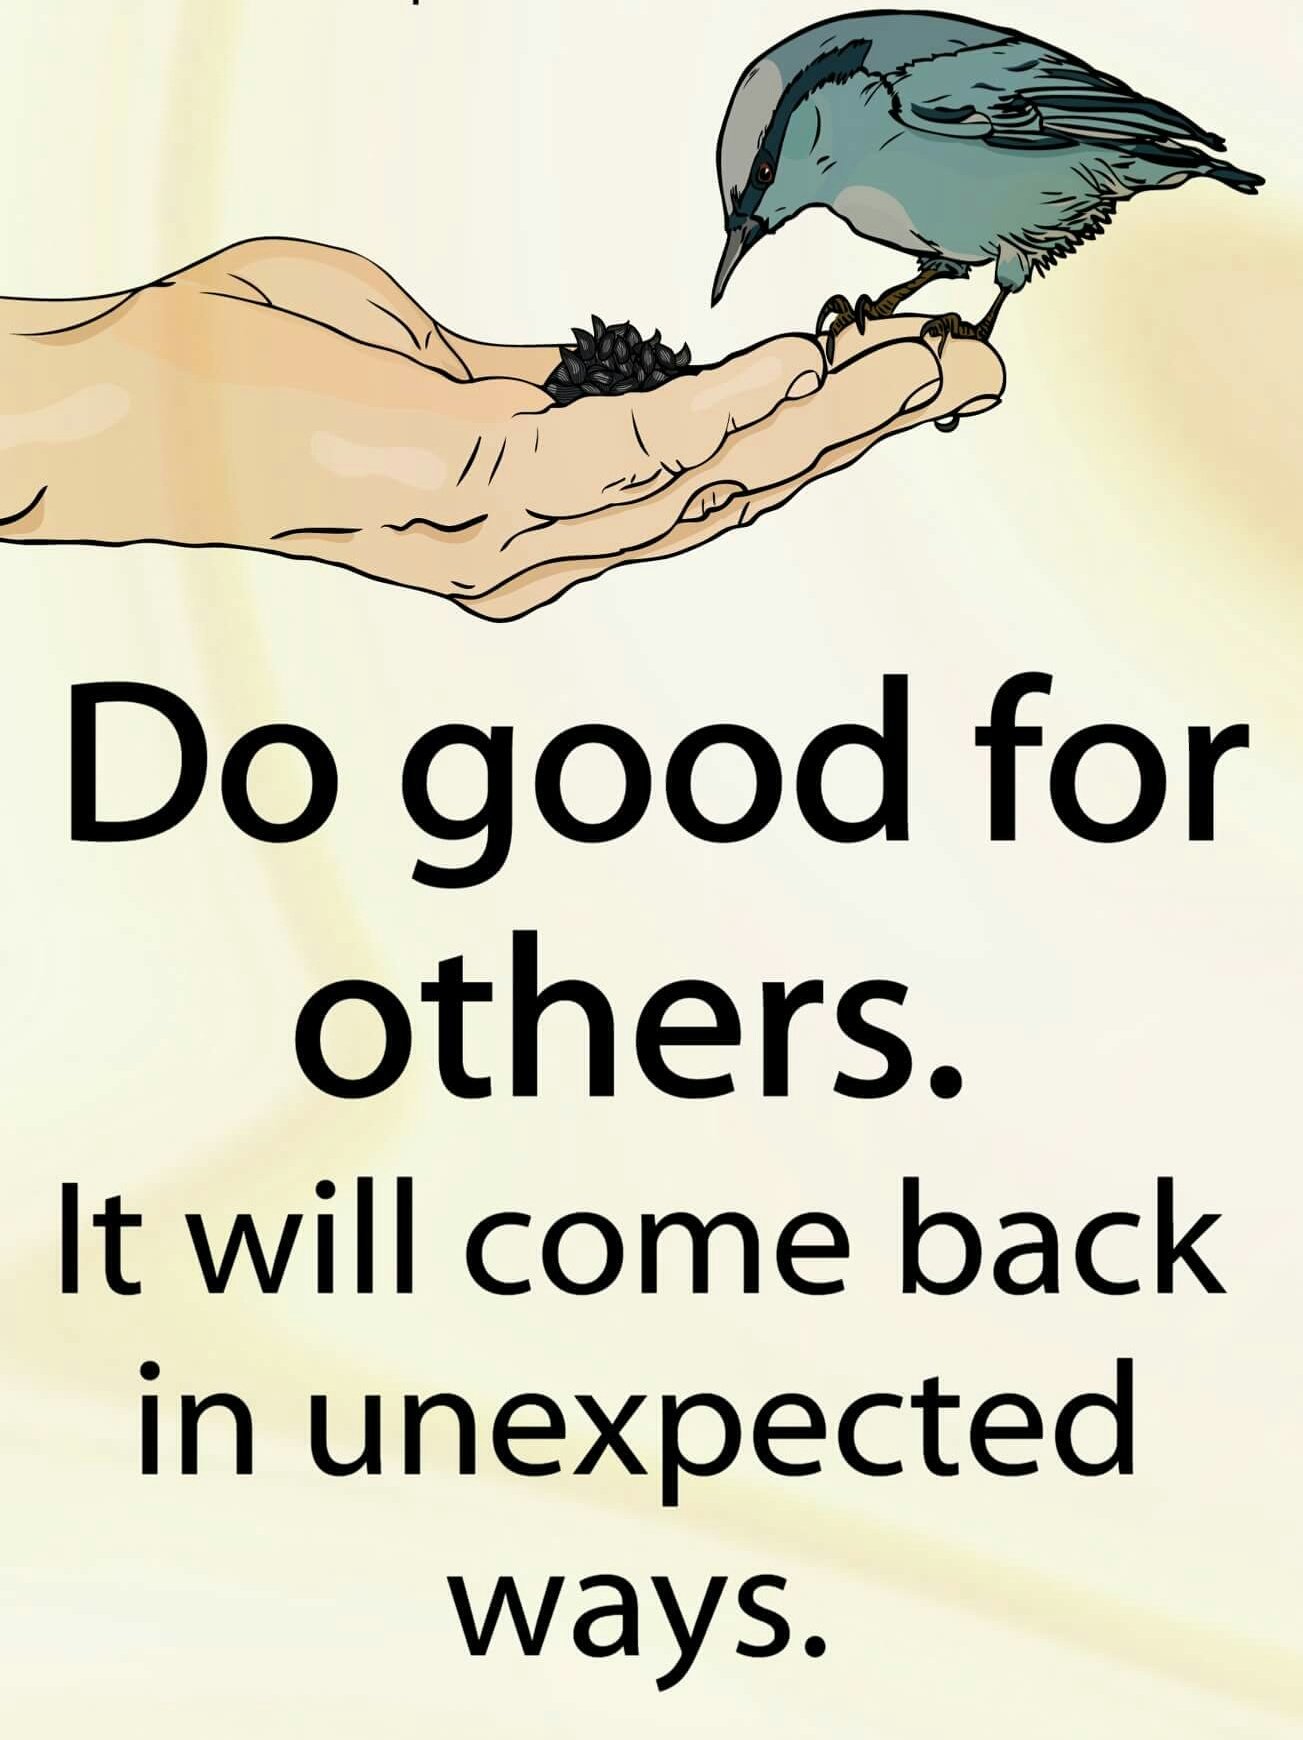 Inspirational Quotes on Twitter: "Do good for others. It will come back